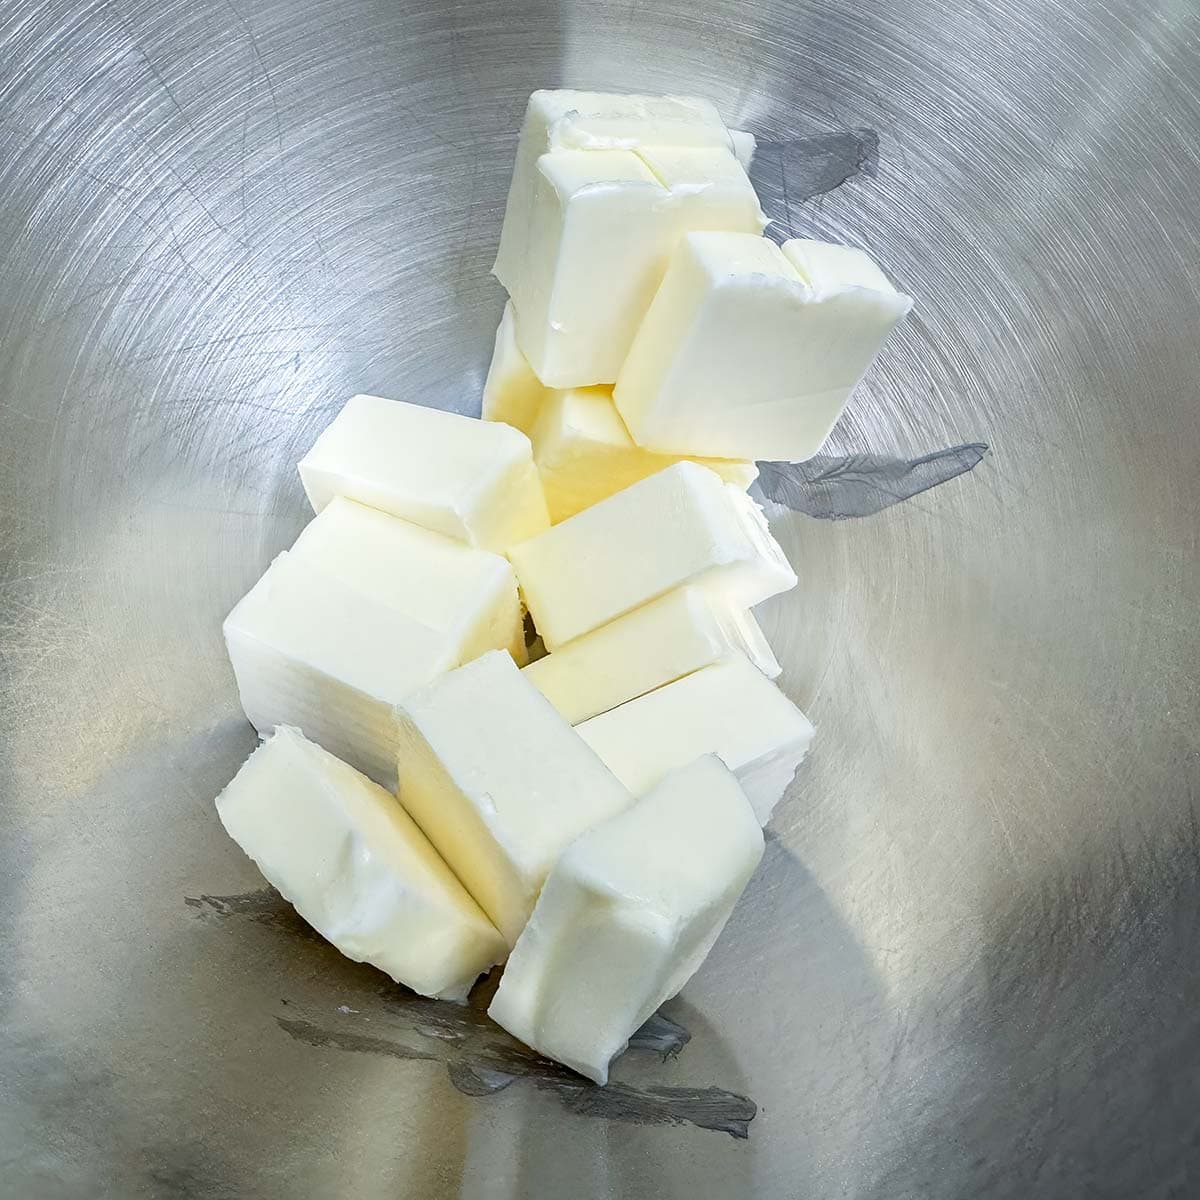 Softened butter in a mixer bowl.